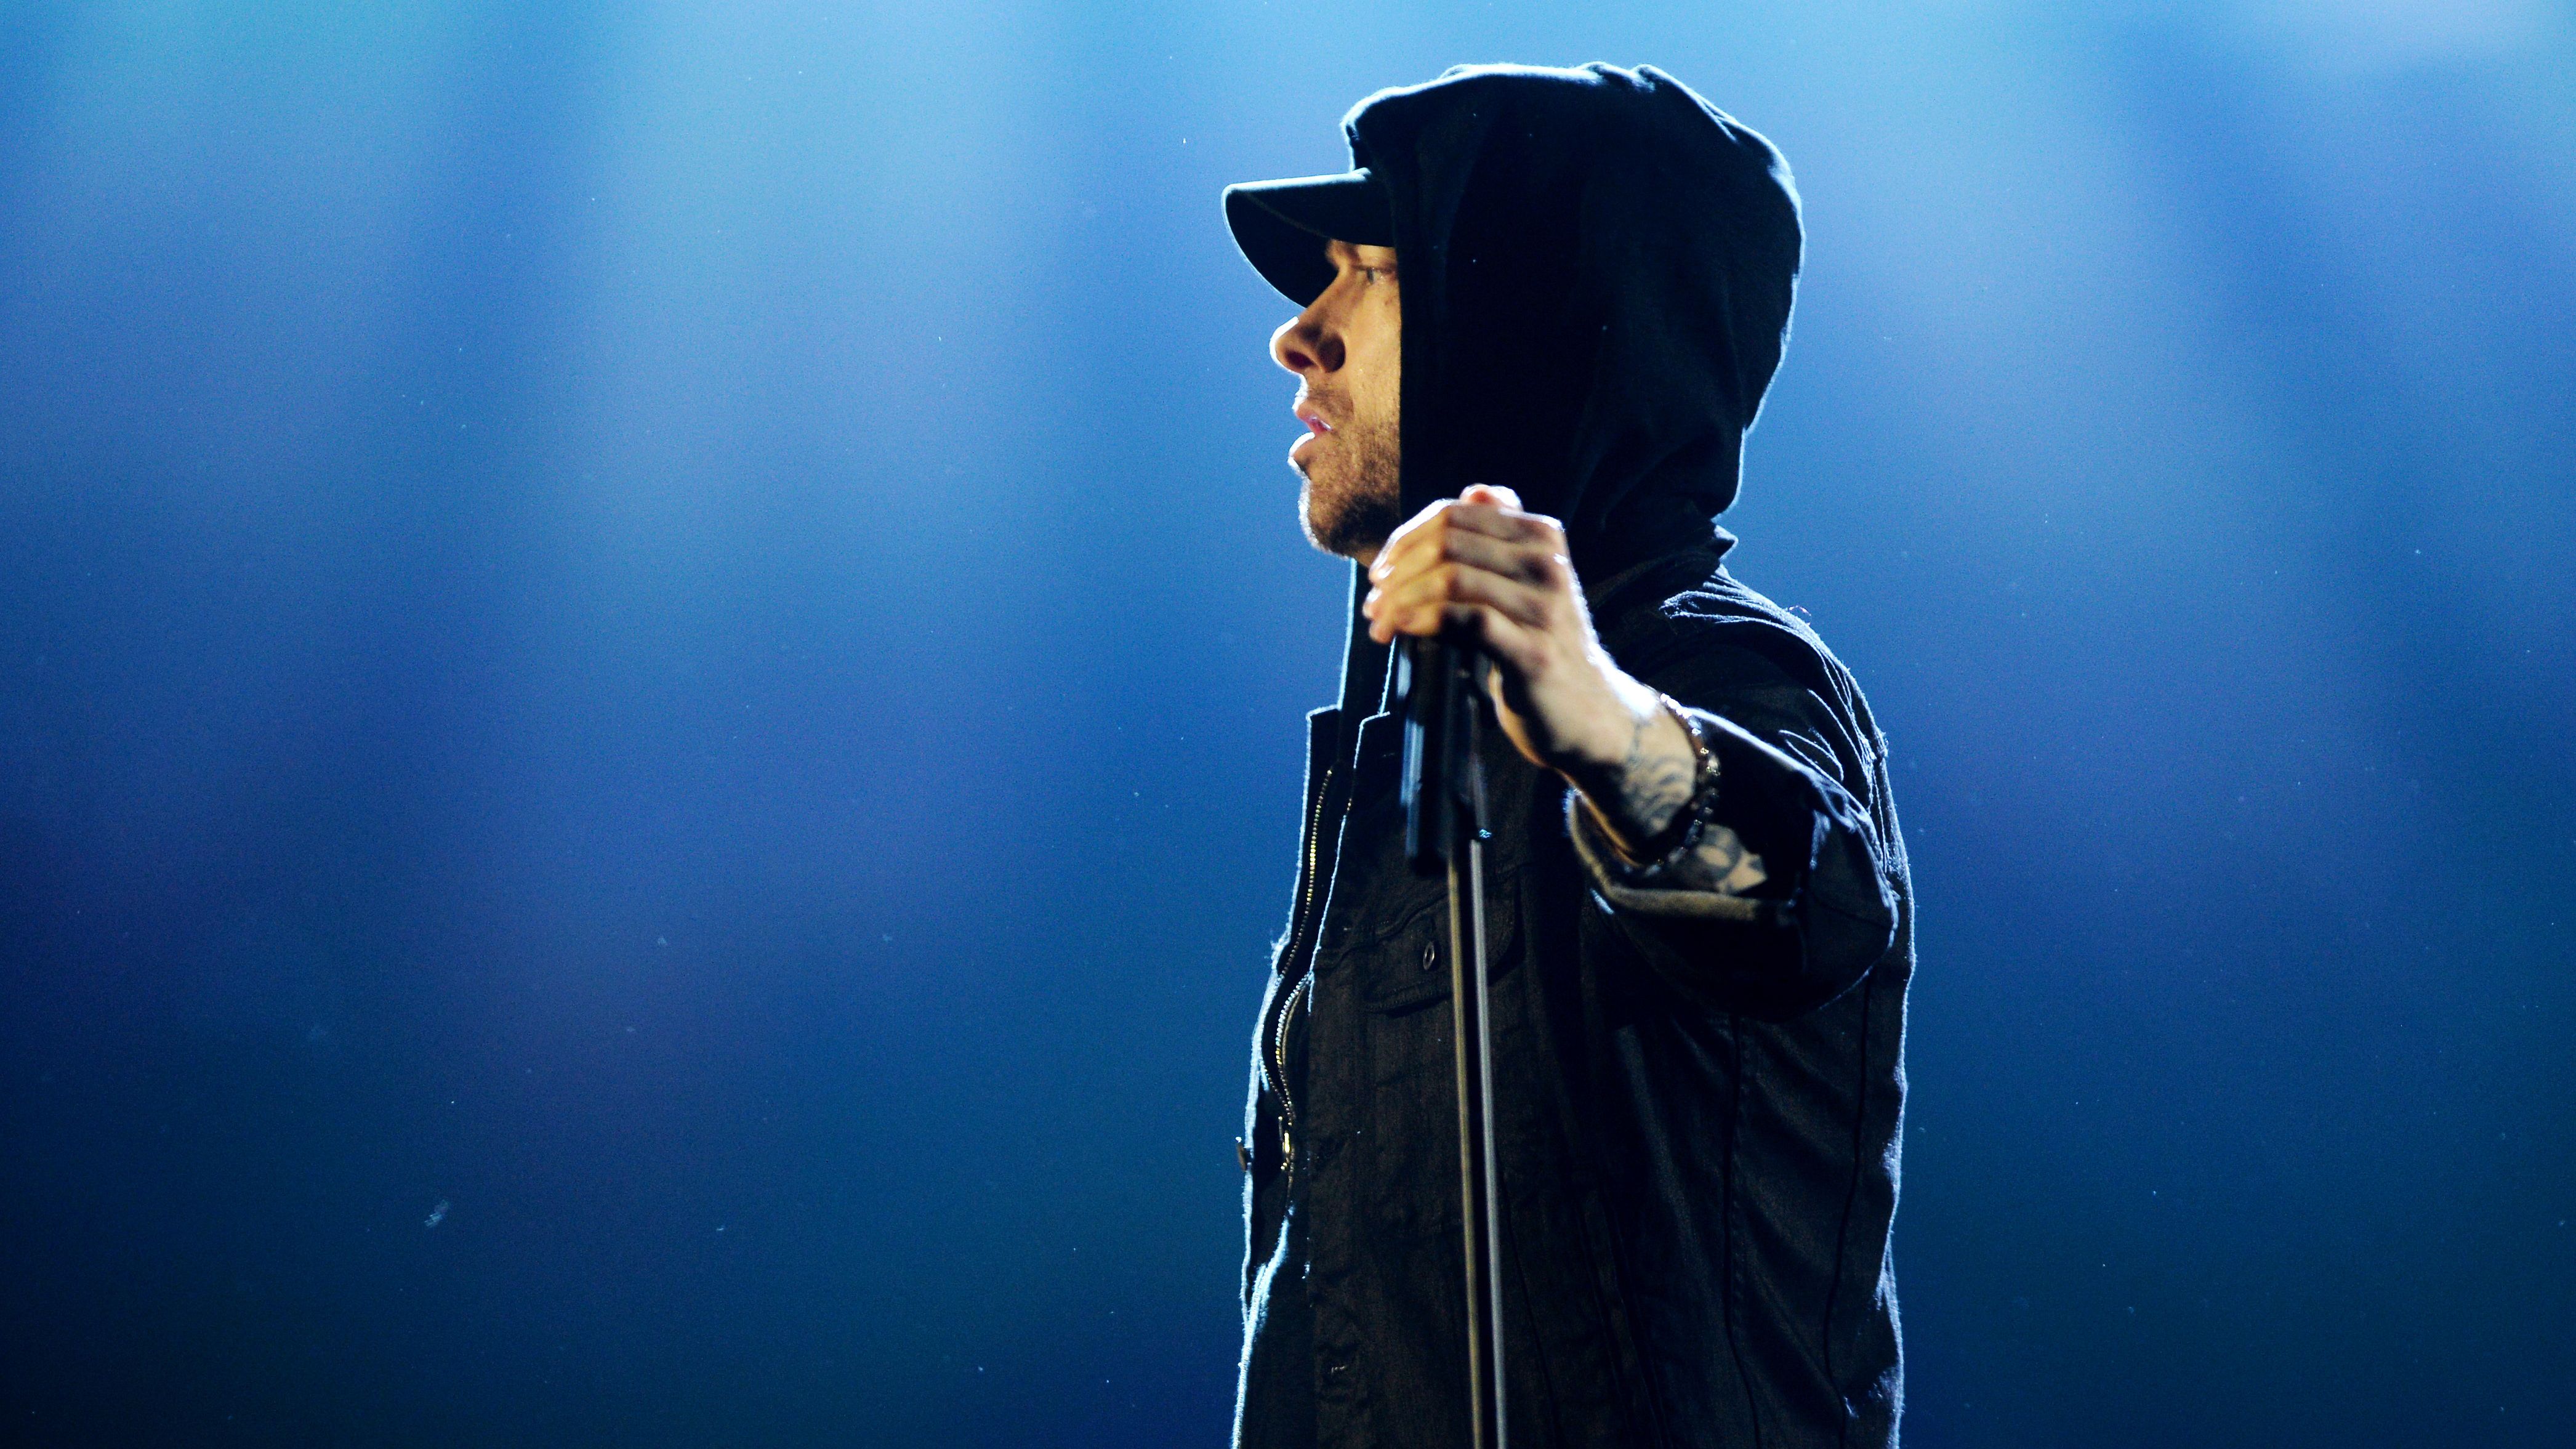 Eminem Releases New Album, 'Music To Be Murdered By' And 'Darkness' Video